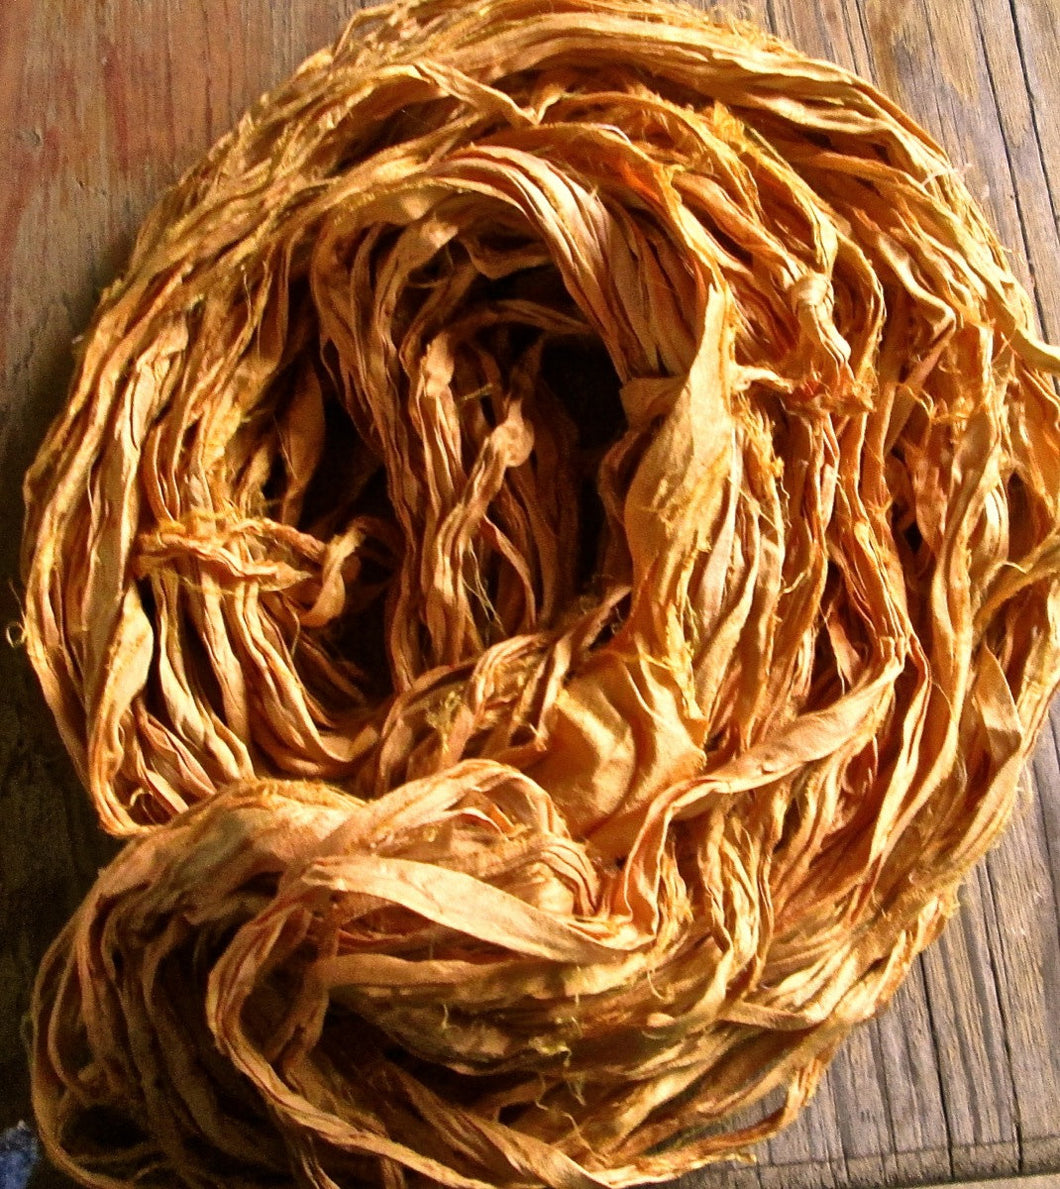 Butter Toffee Recycled Sari Silk Ribbon 5 Yards Jewelry Weaving Spinning Mixed Media SUPER FAST SHIPPING!